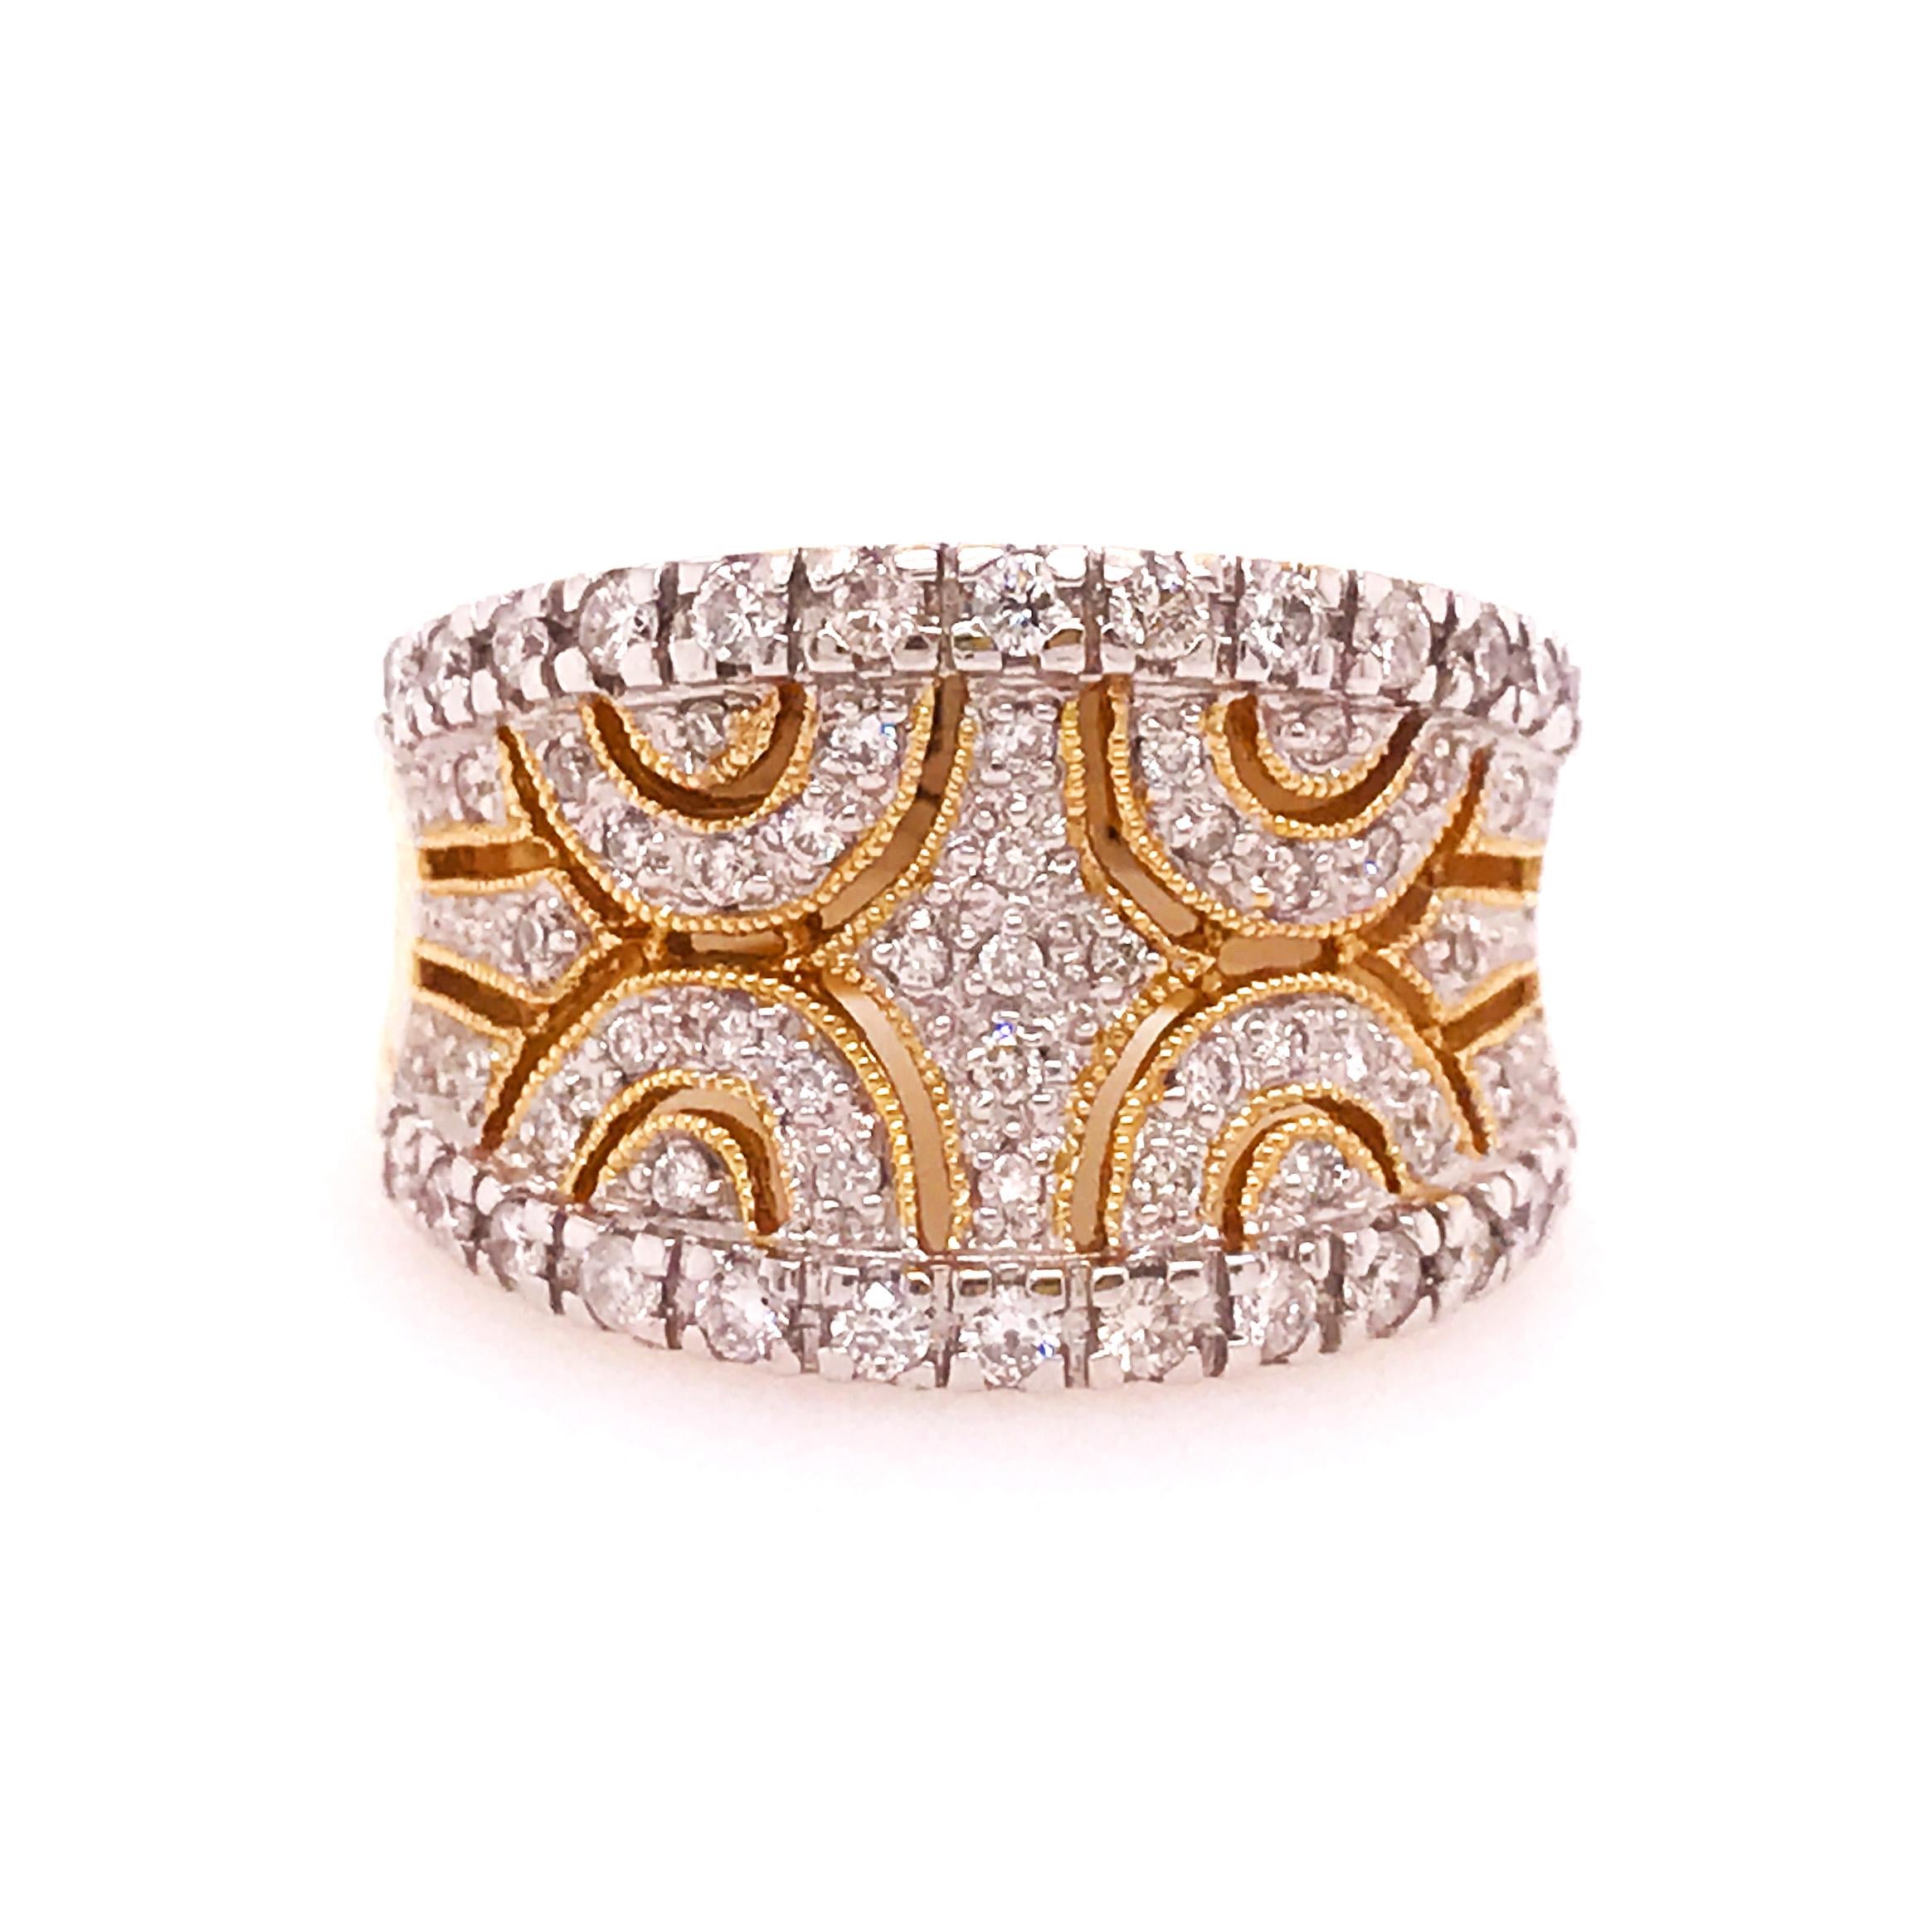 Wide Diamond Fashion Band! This hand crafted diamond ring is stunning! With a unique, open diamond design with hand fabricated milgrain beading lining the diamond design. The top of this ring is paved with round brilliant diamonds. The design is